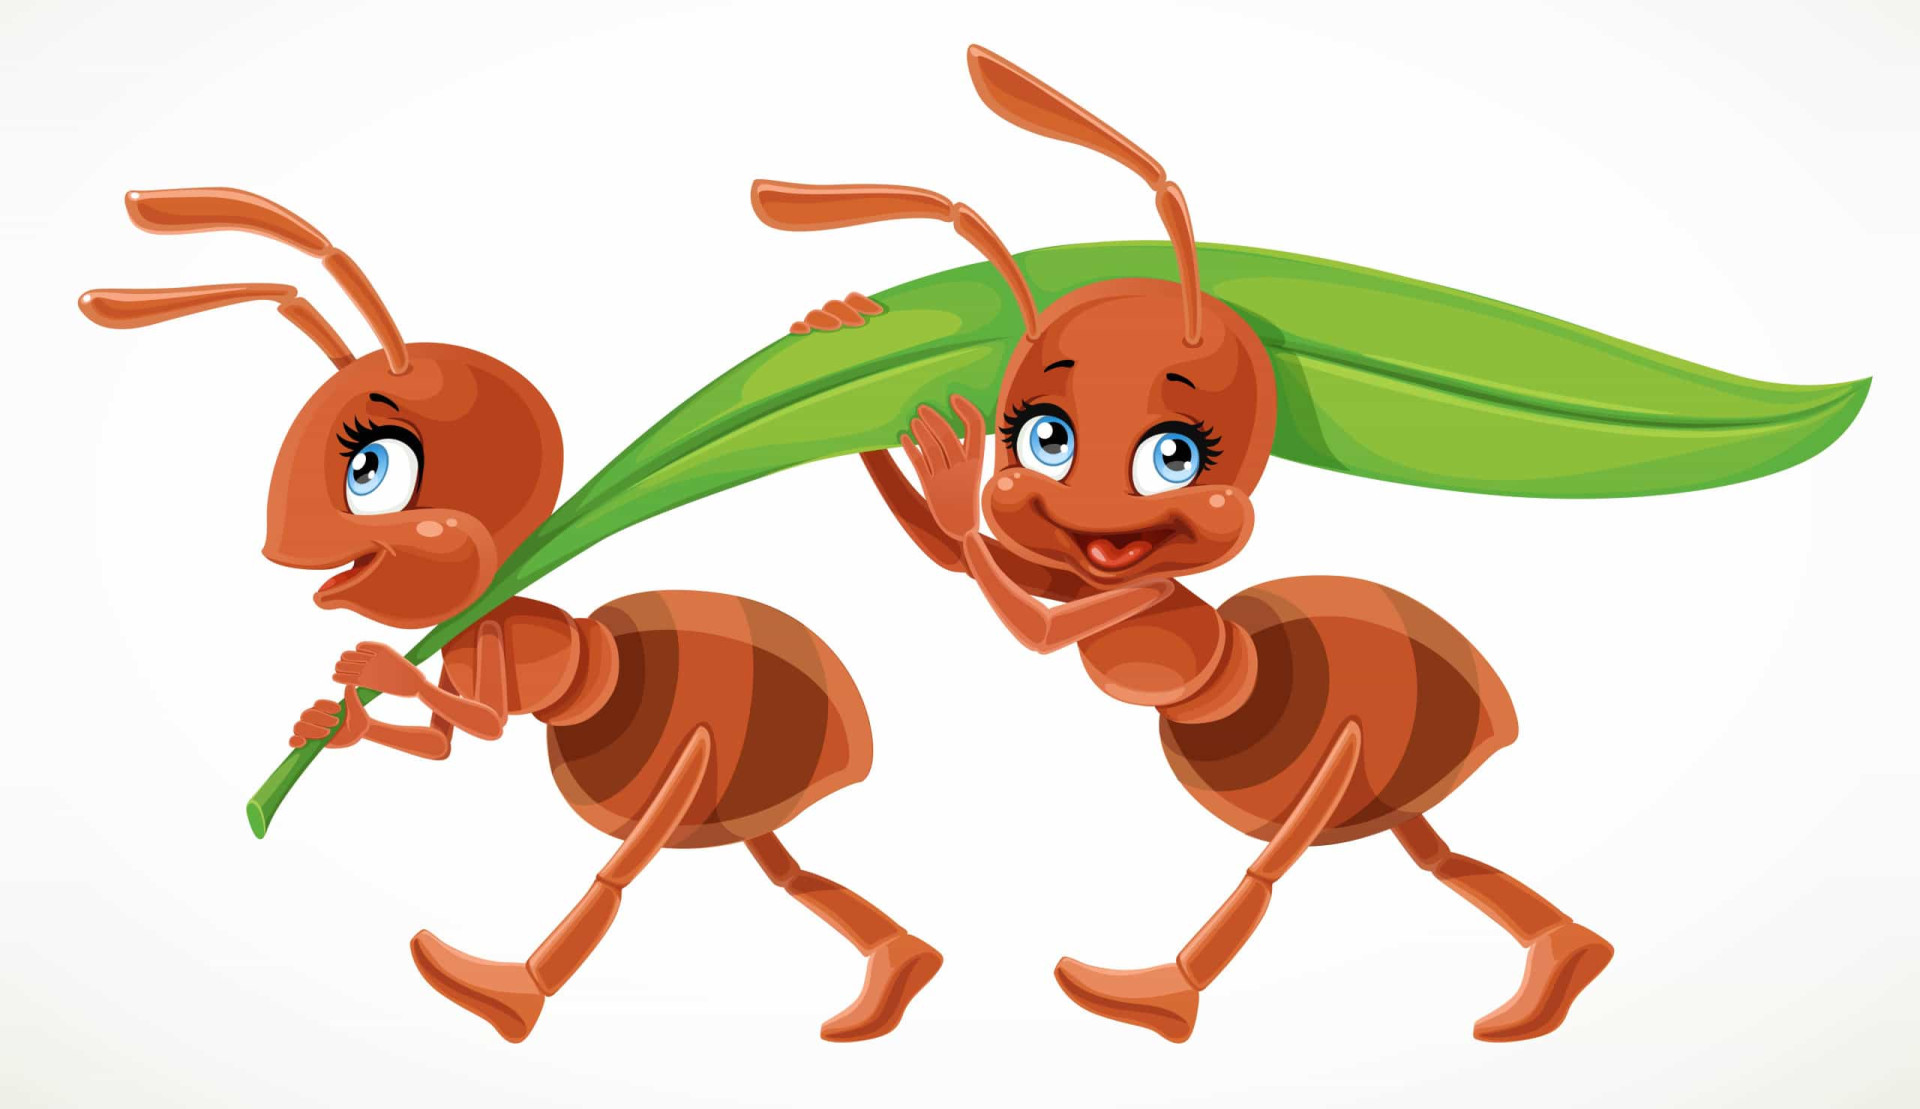 <p>Ants epitomize teamwork, and what better way for kids to learn this than in a fun song like 'The Ants Go Marching.'</p><p><a href="https://www.msn.com/en-us/community/channel/vid-7xx8mnucu55yw63we9va2gwr7uihbxwc68fxqp25x6tg4ftibpra?cvid=94631541bc0f4f89bfd59158d696ad7e">Follow us and access great exclusive content every day</a></p>